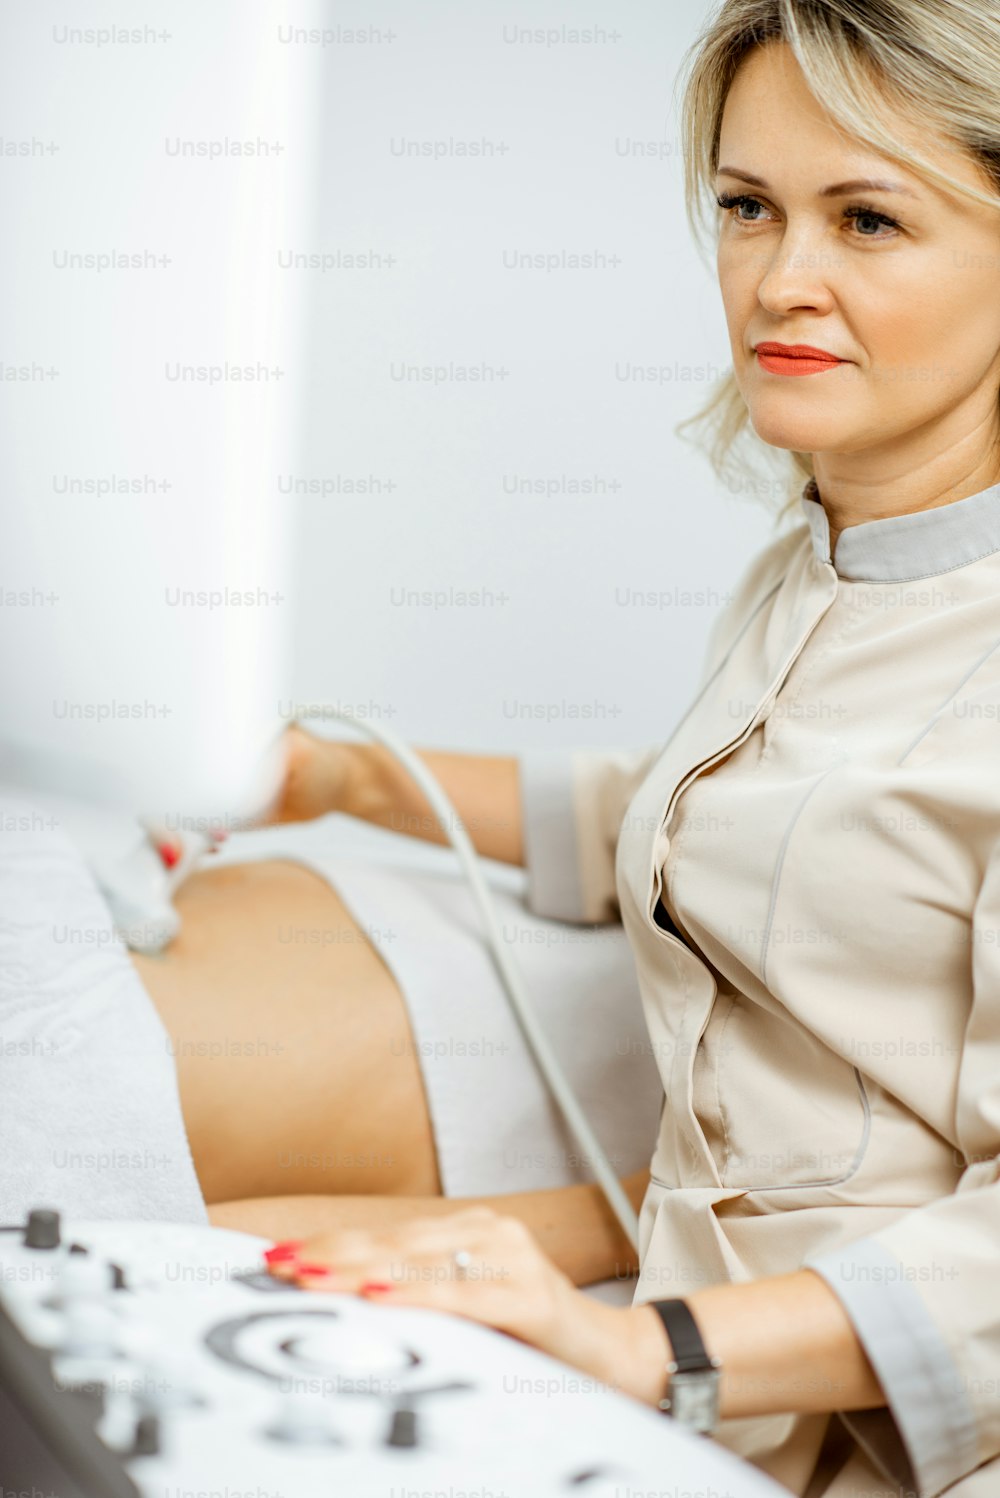 Female doctor performs ultrasound examination of a women's pelvic organs or diagnosing early pregnancy at the medical office